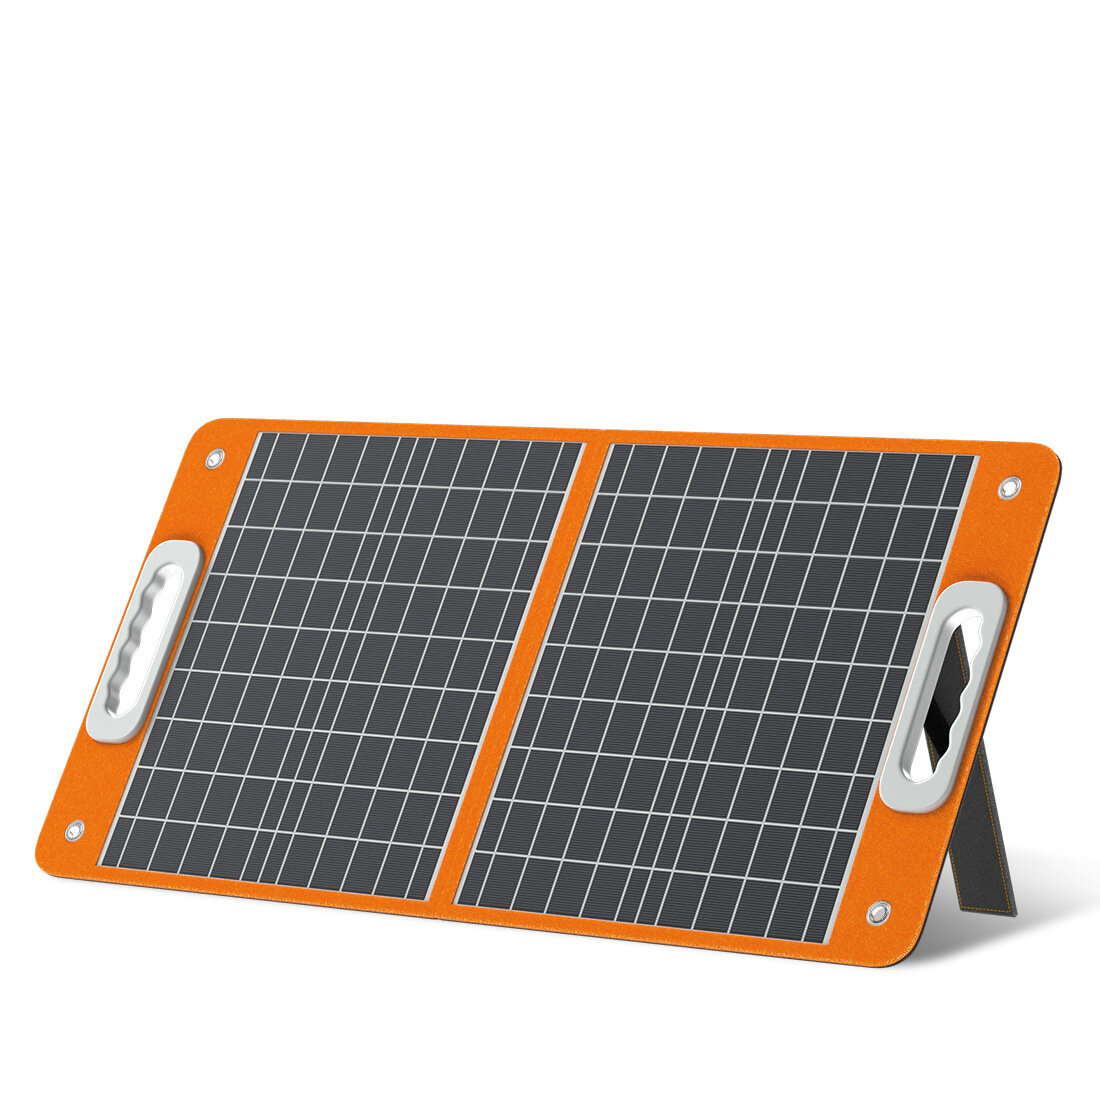 Image of [EU Direct] FlashFish 18V 60W Foldable Solar Panel Portable Solar Charger with DC Output USB-C QC30 for Phones Tablets